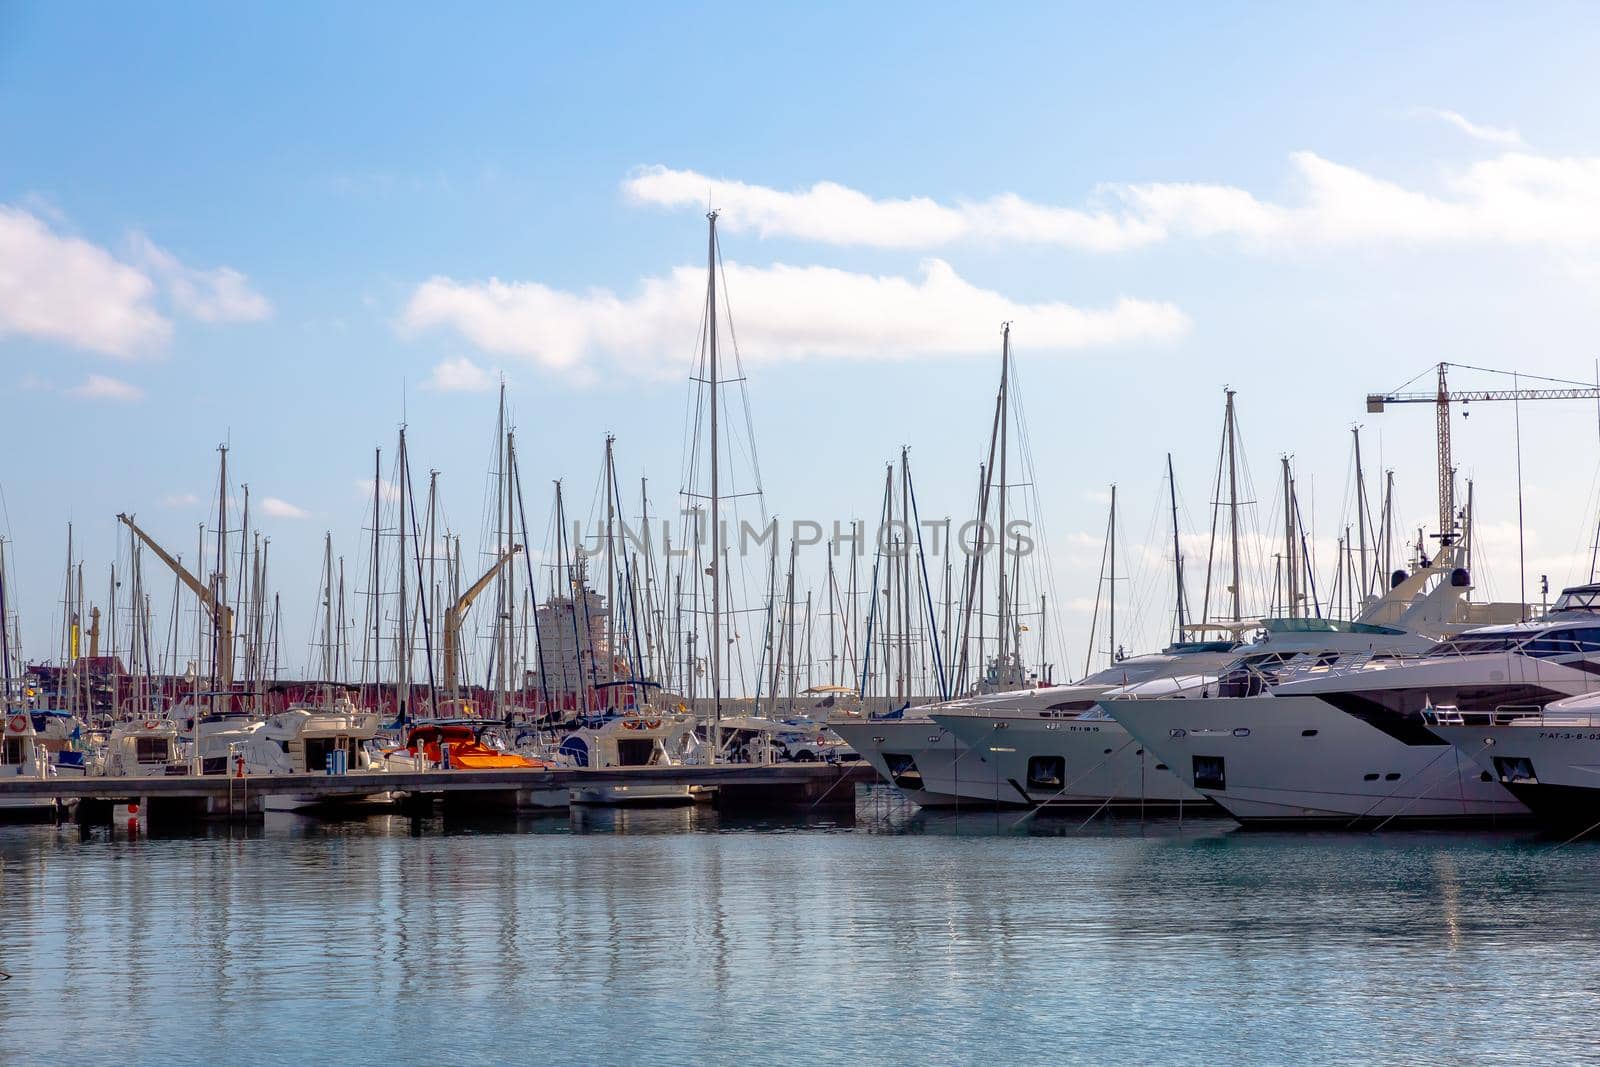 White yachts are in a marina on the Mediterranean coast by Milanchikov